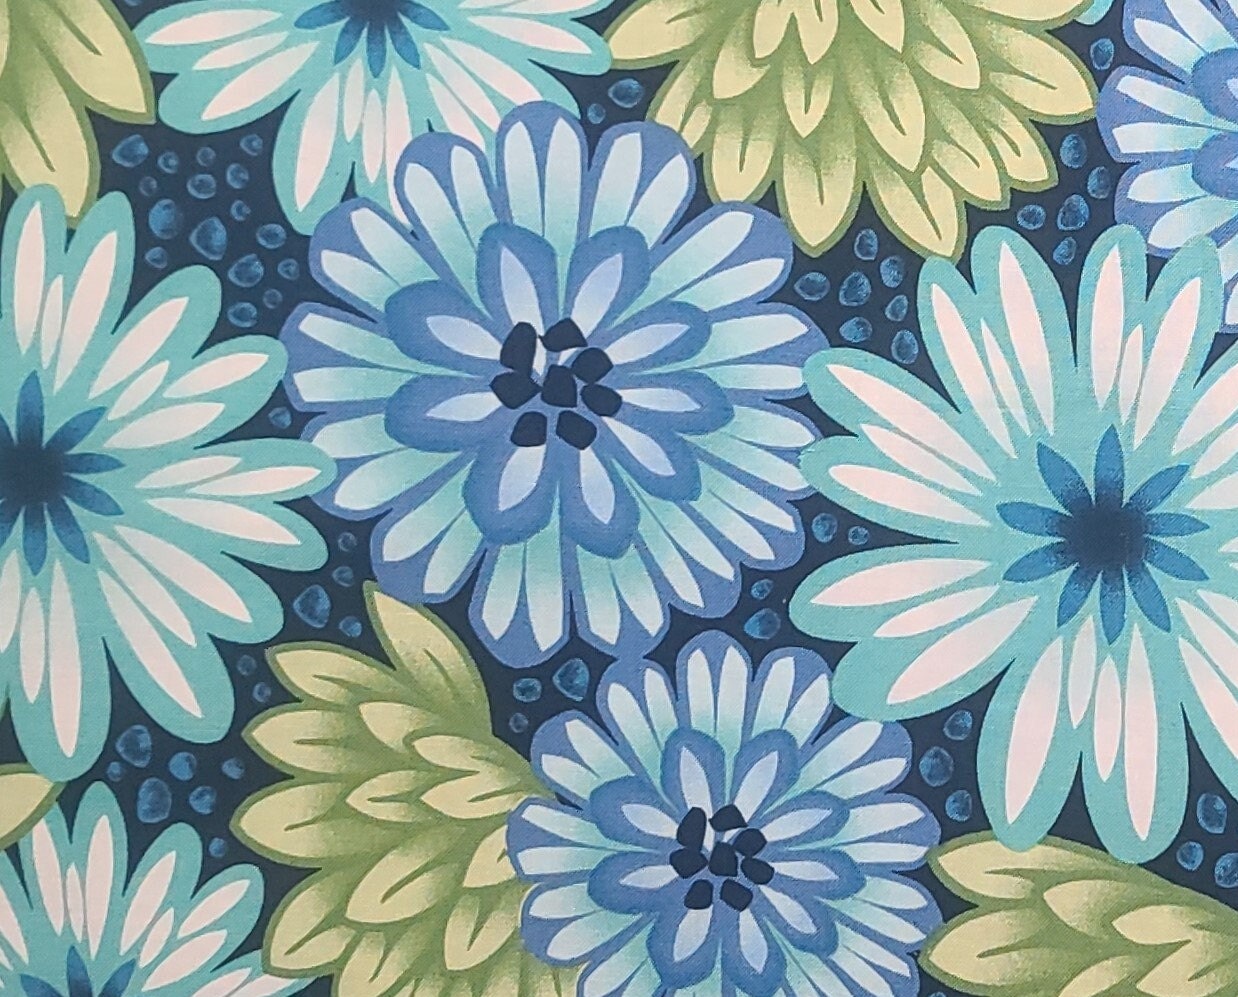 EOB - Bold Moves Studio 37 Design 9544 for Marcus Fabrics - Dark Blue Fabric / Teal, Blue and Green Retro Flower and "Pebble" Print